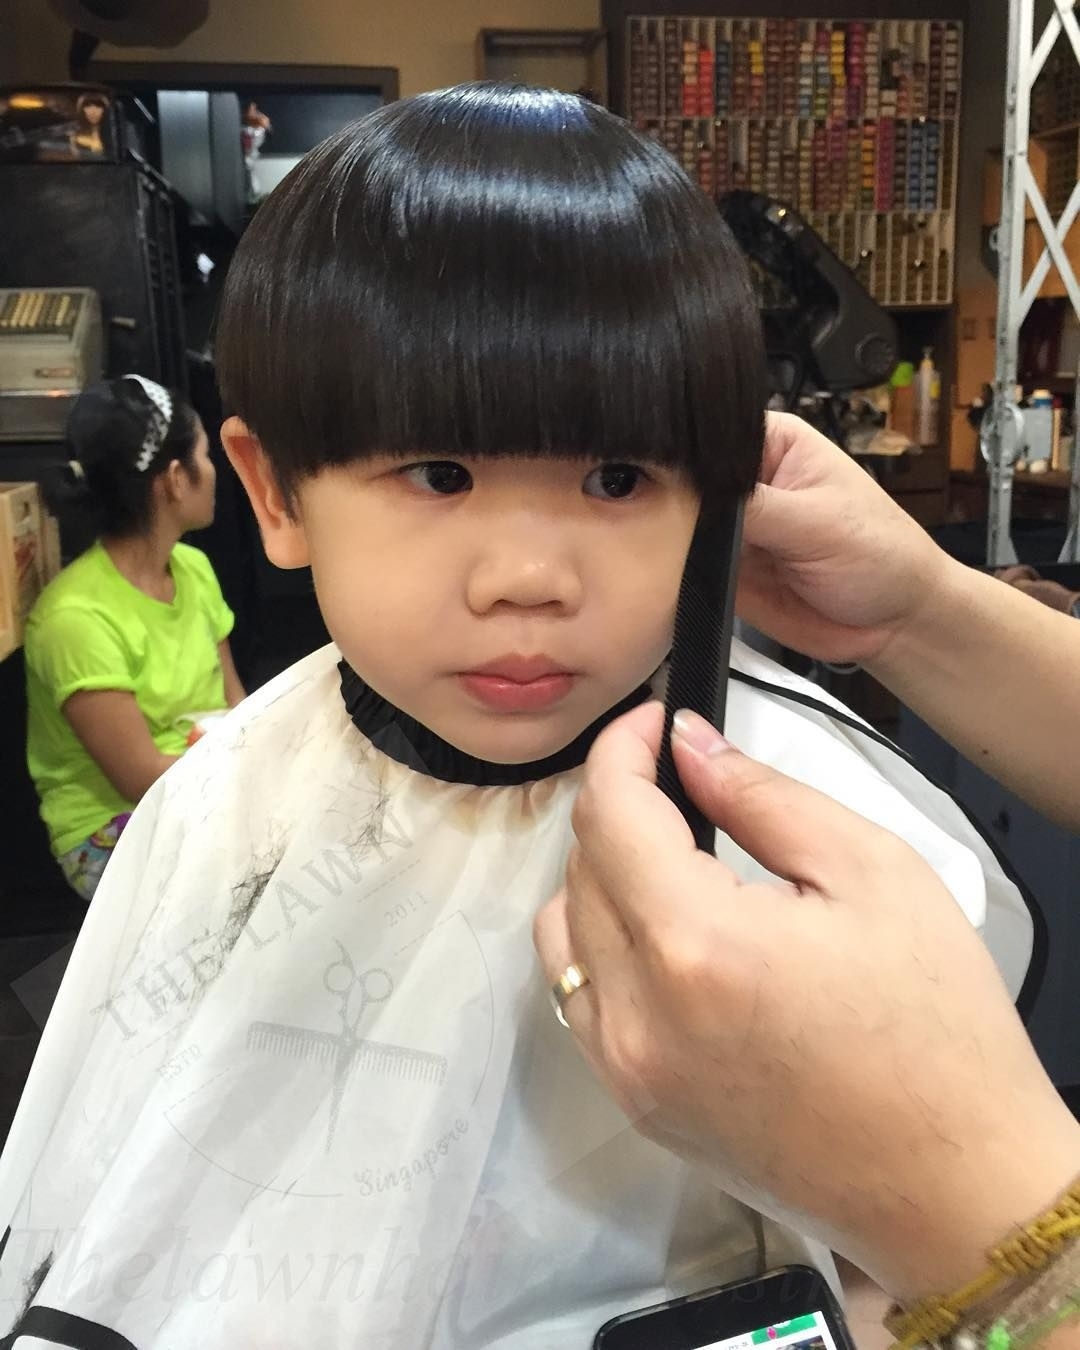 Image Result For Asian Bowl Cut Female | Bobs | Toddler Boy Haircuts pertaining to Superb Asian Toddler Boy Hairstyles